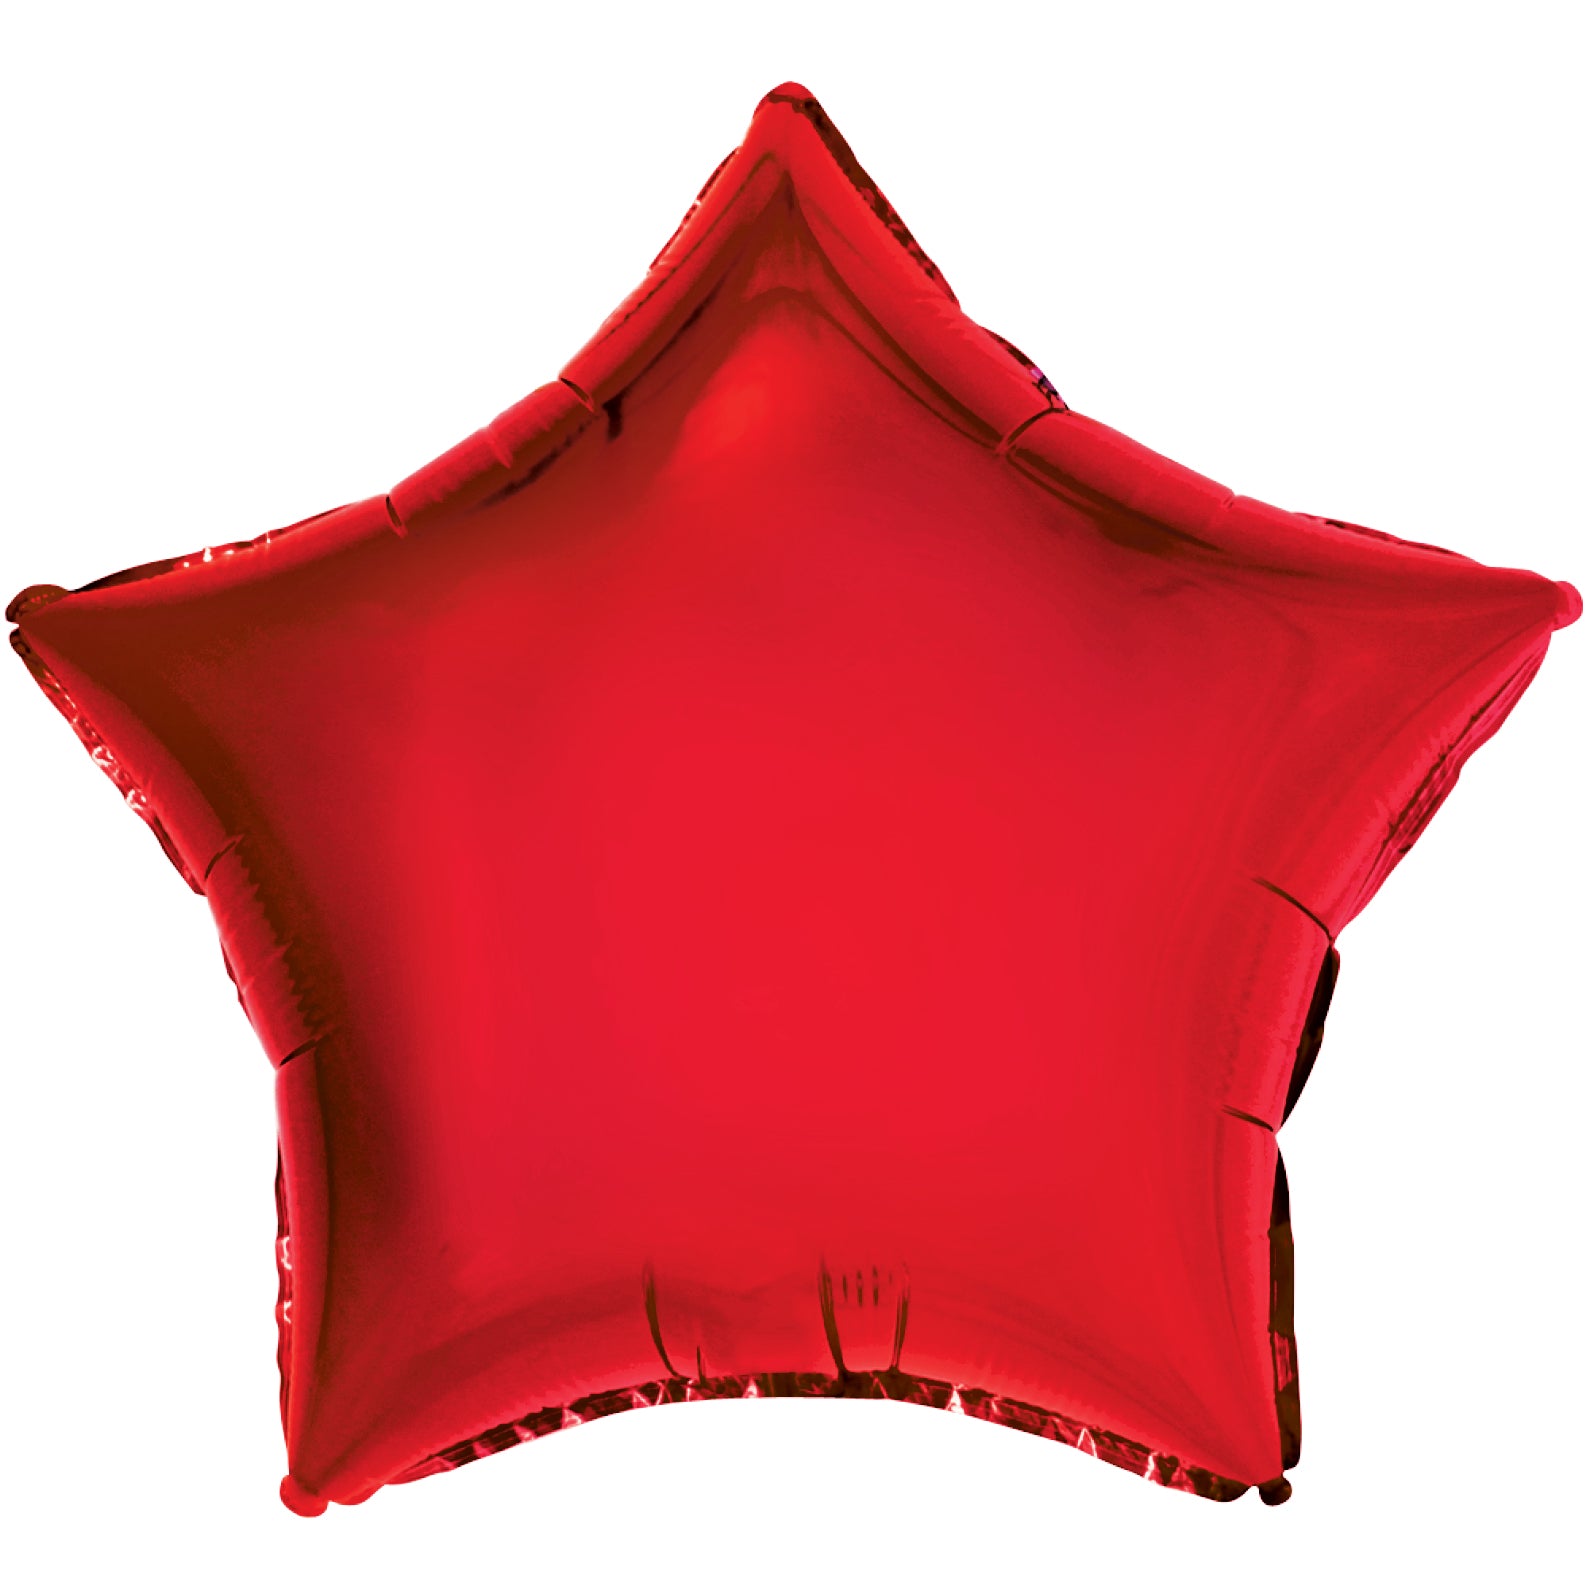 BALLOON FOIL SHAPED STAR 20IN RED